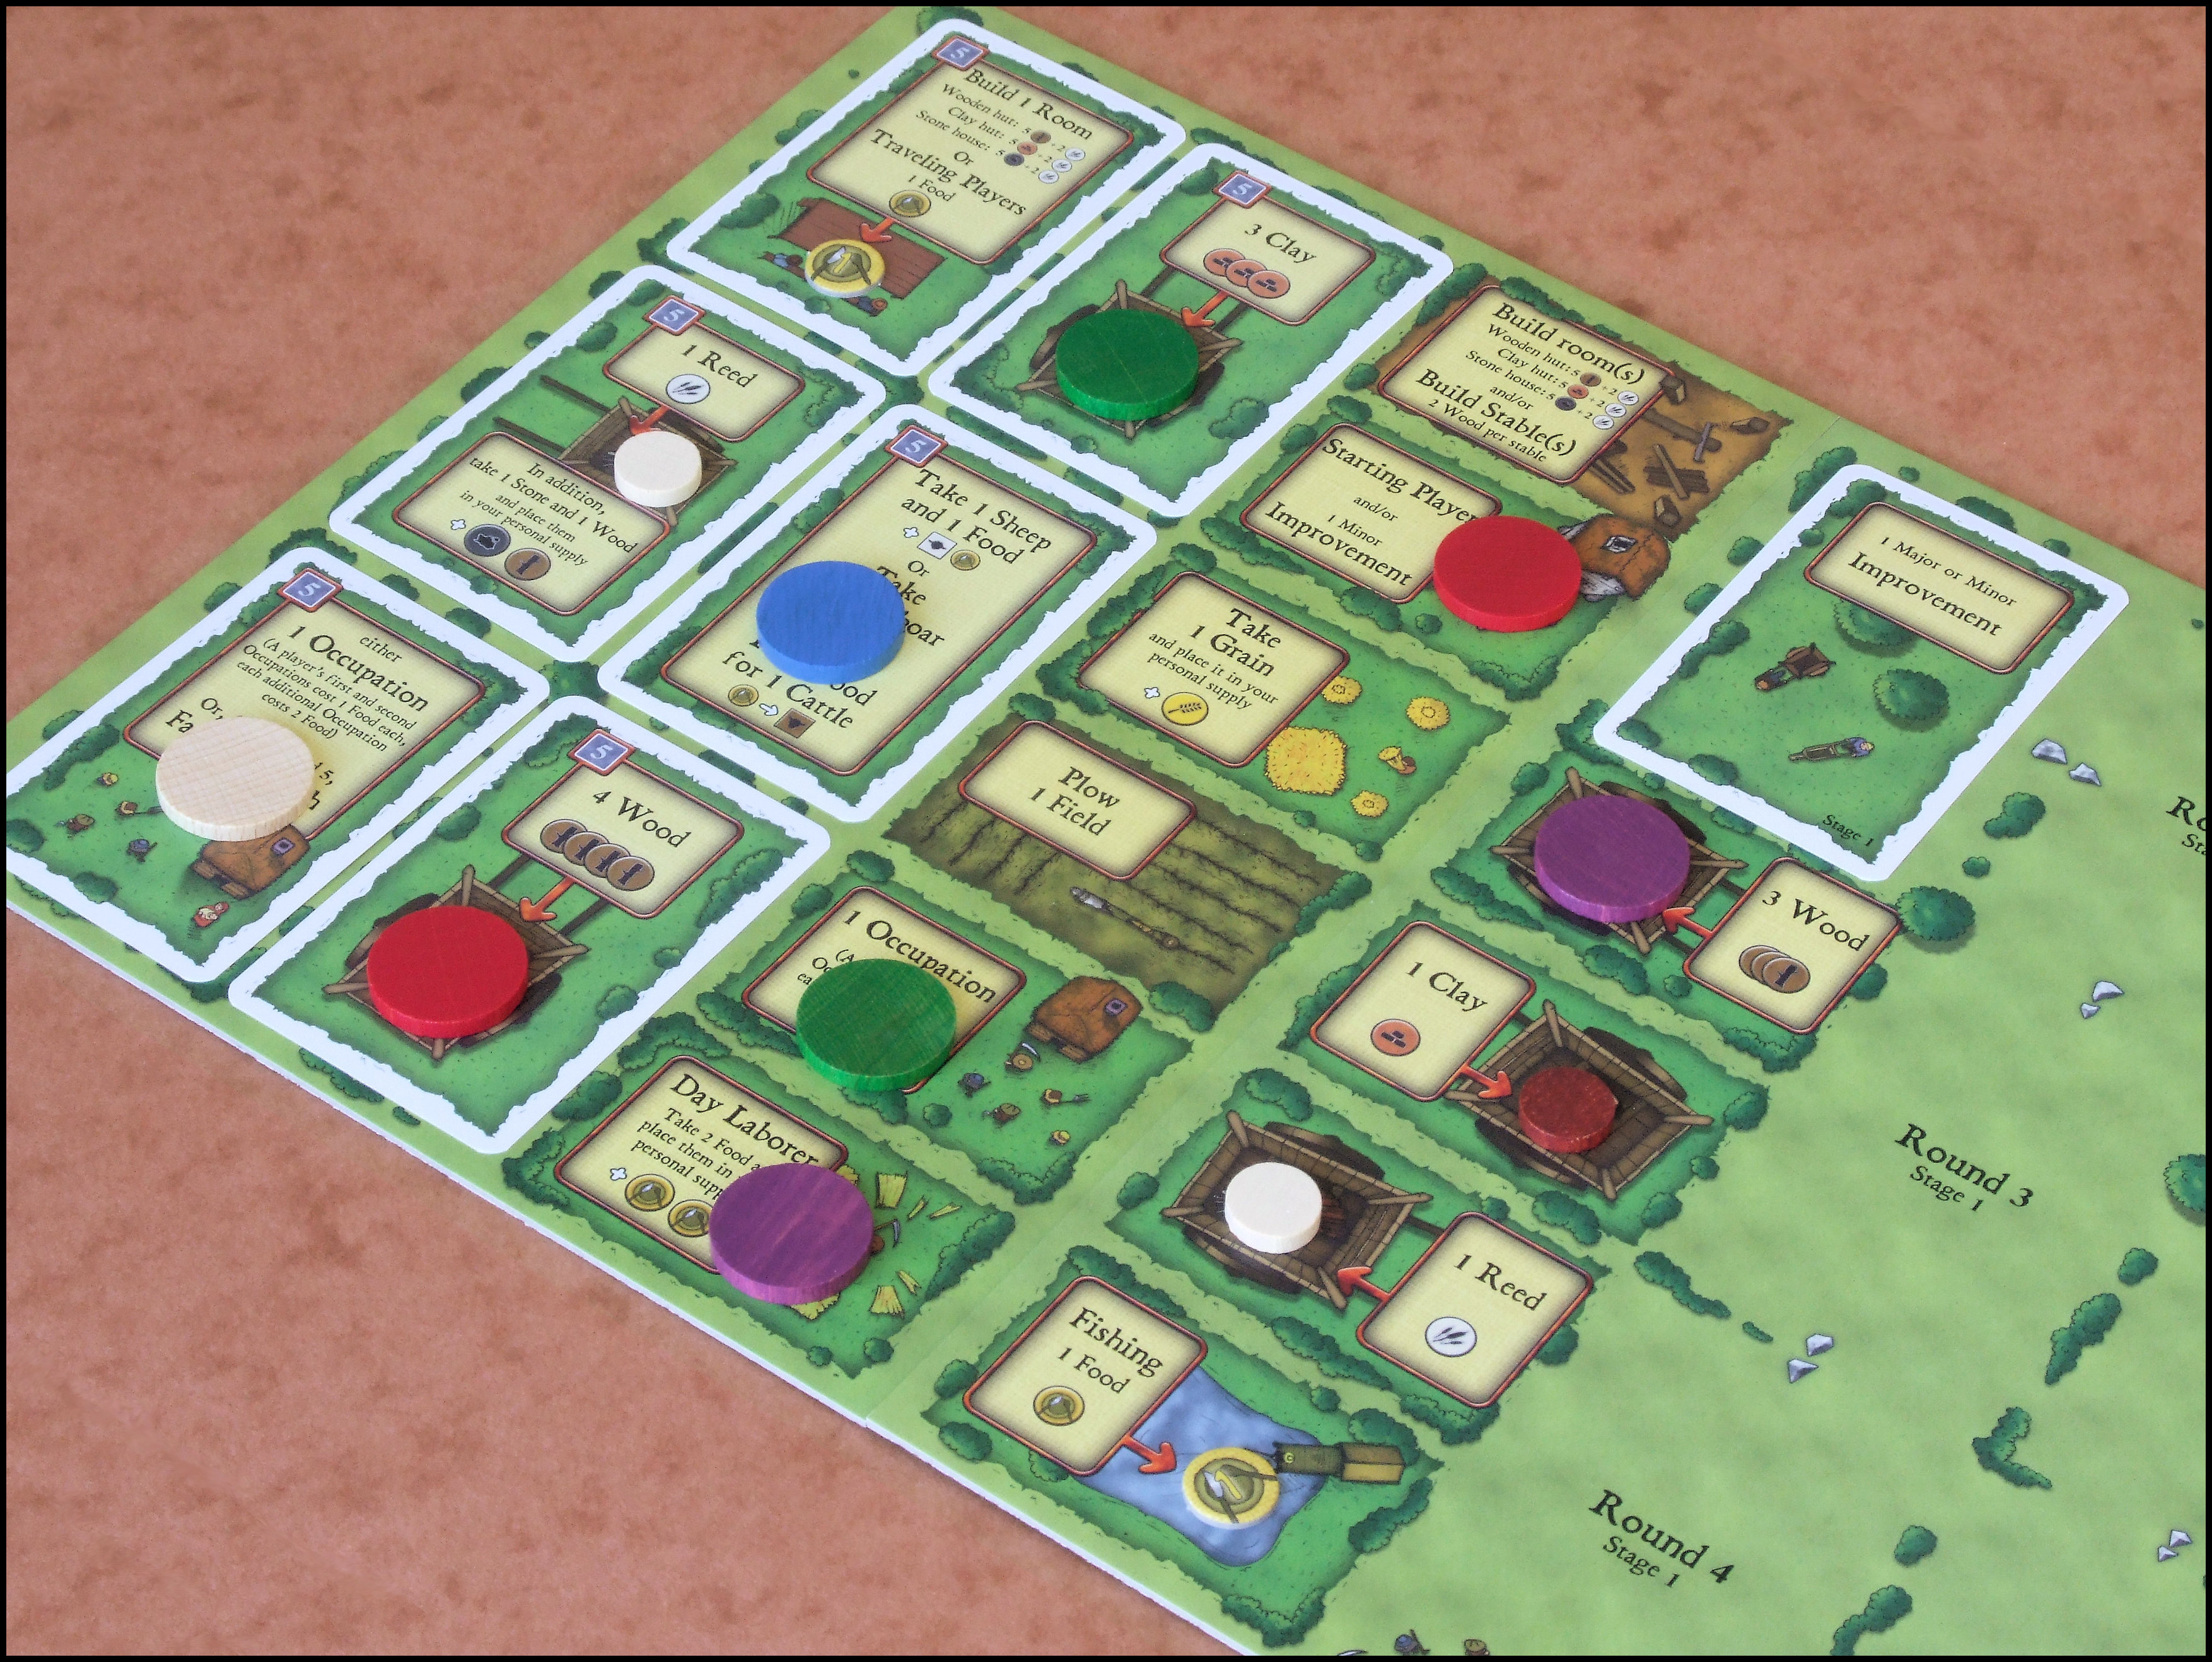 Agricola - 1st Turn 8th Action